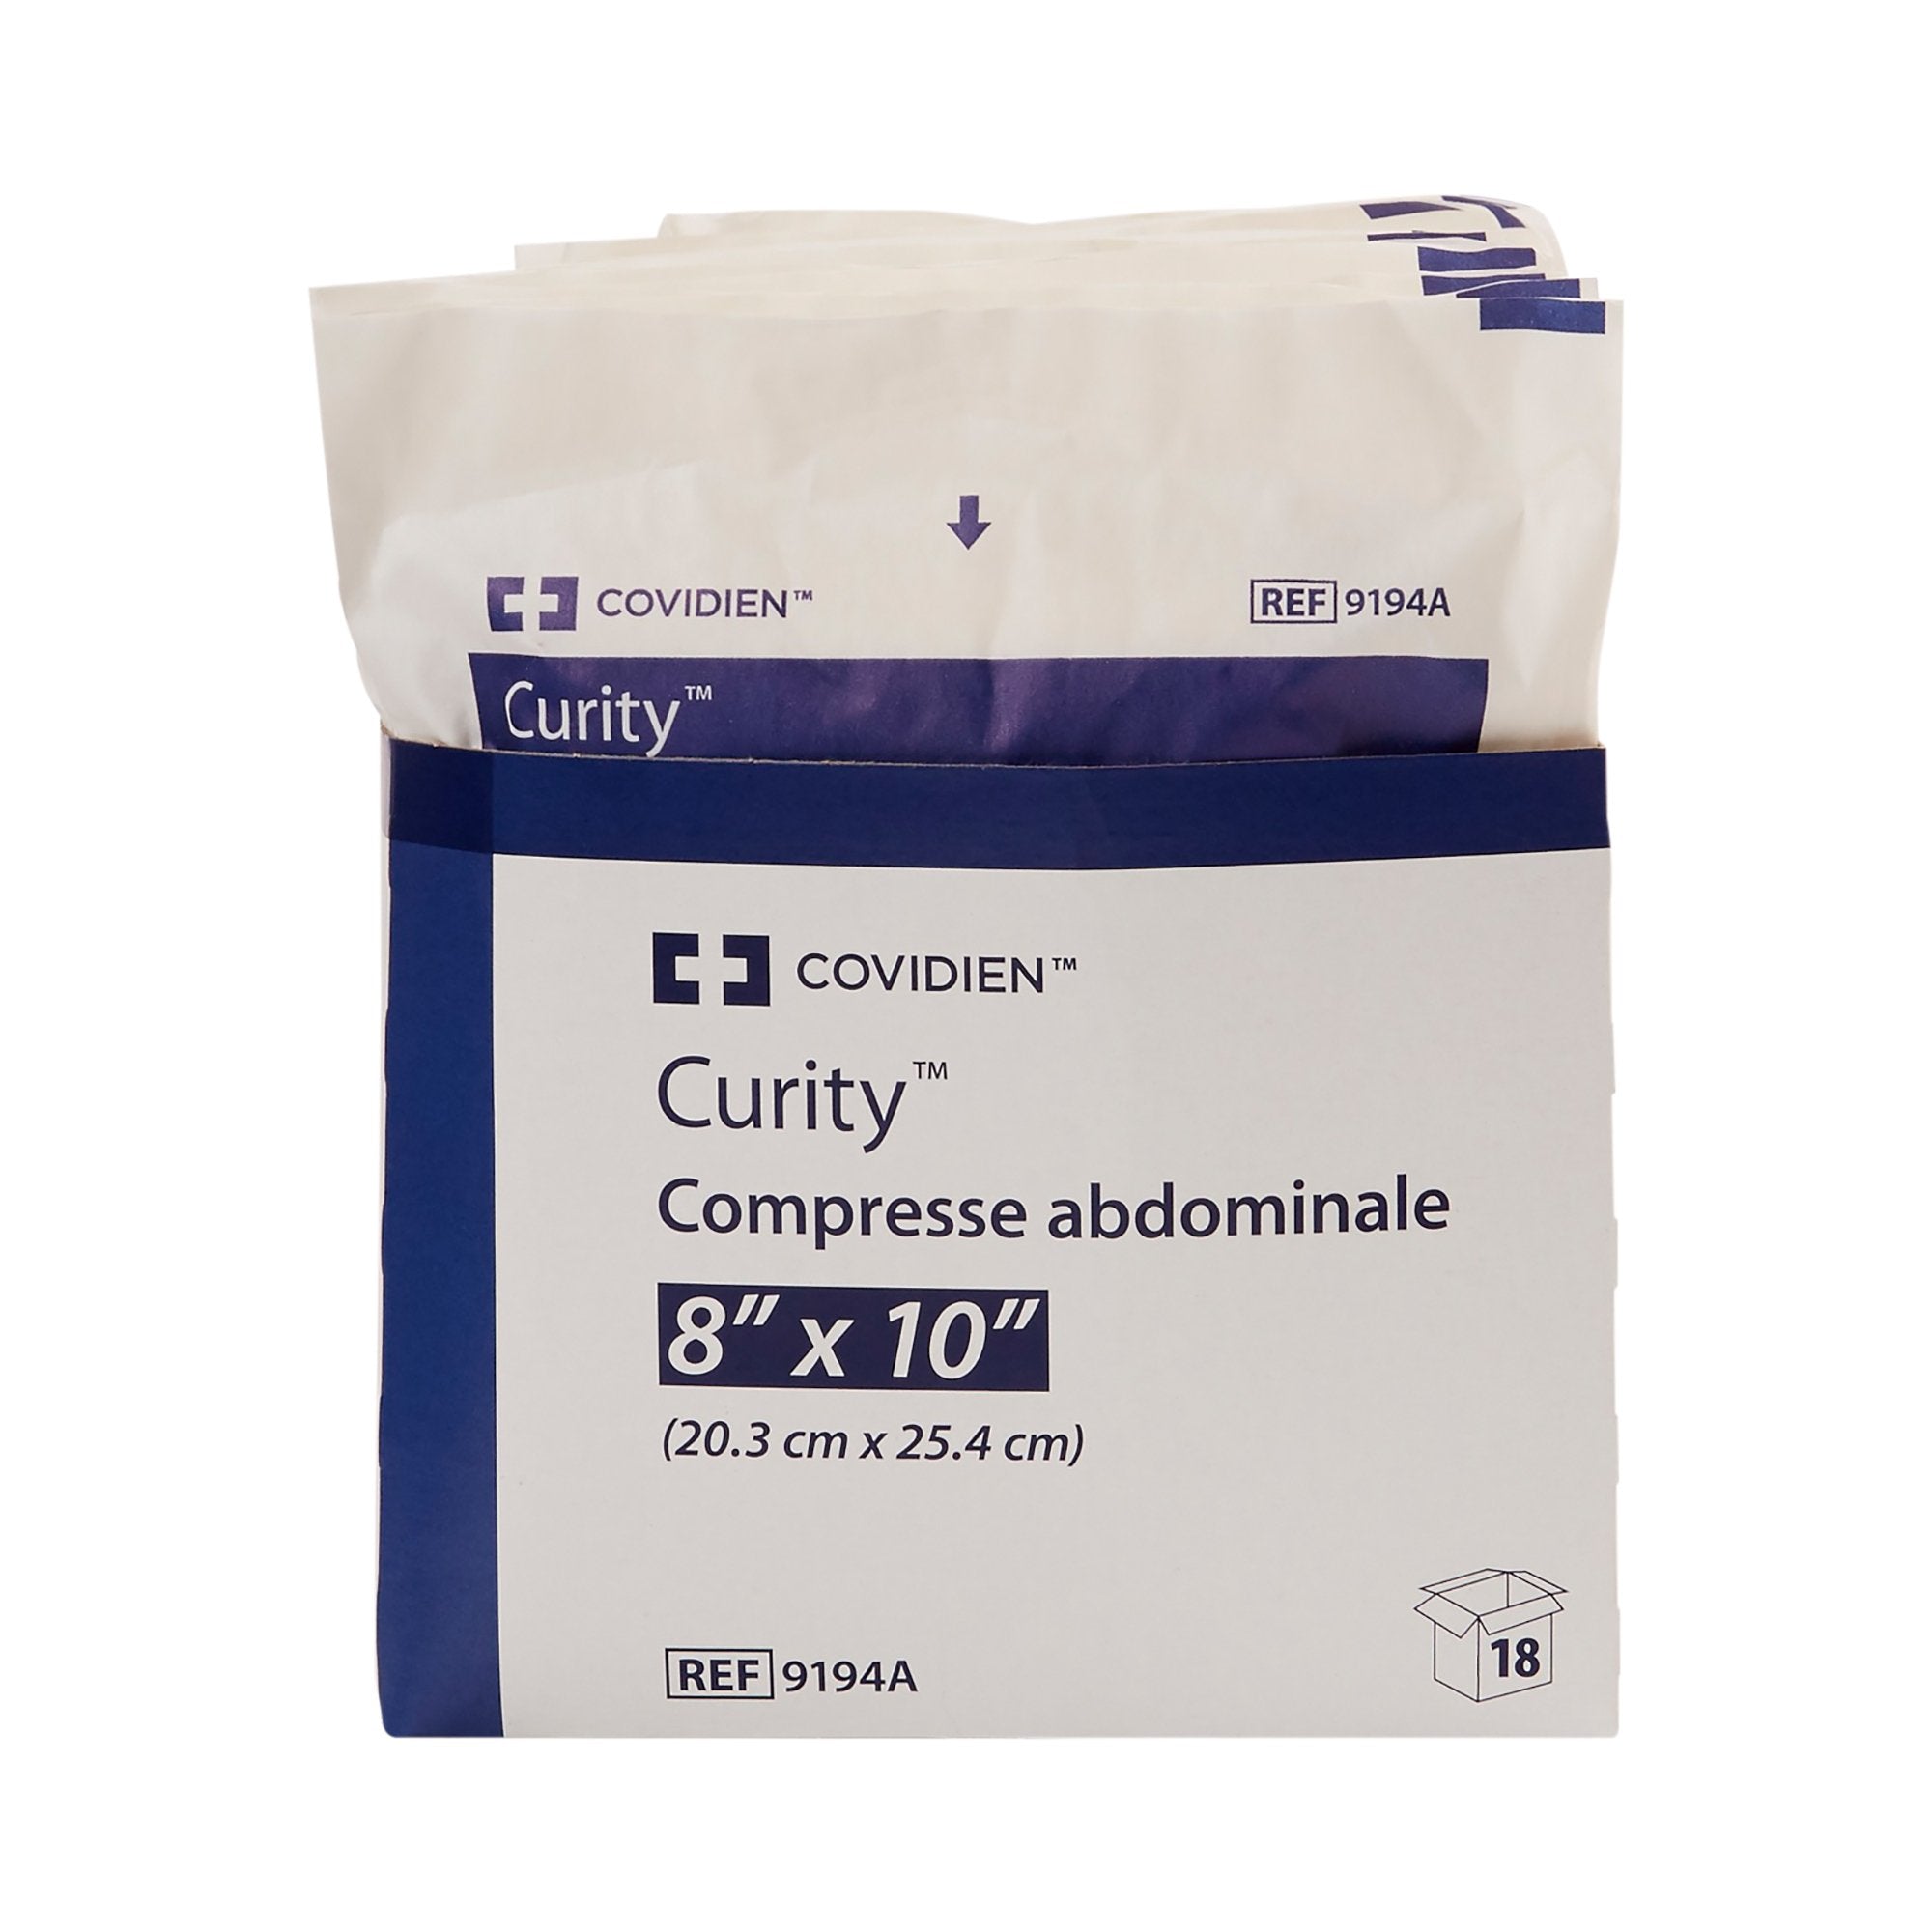 Abdominal Pad Curity™ 8 X 10 Inch 1 per Pack Sterile Rectangle